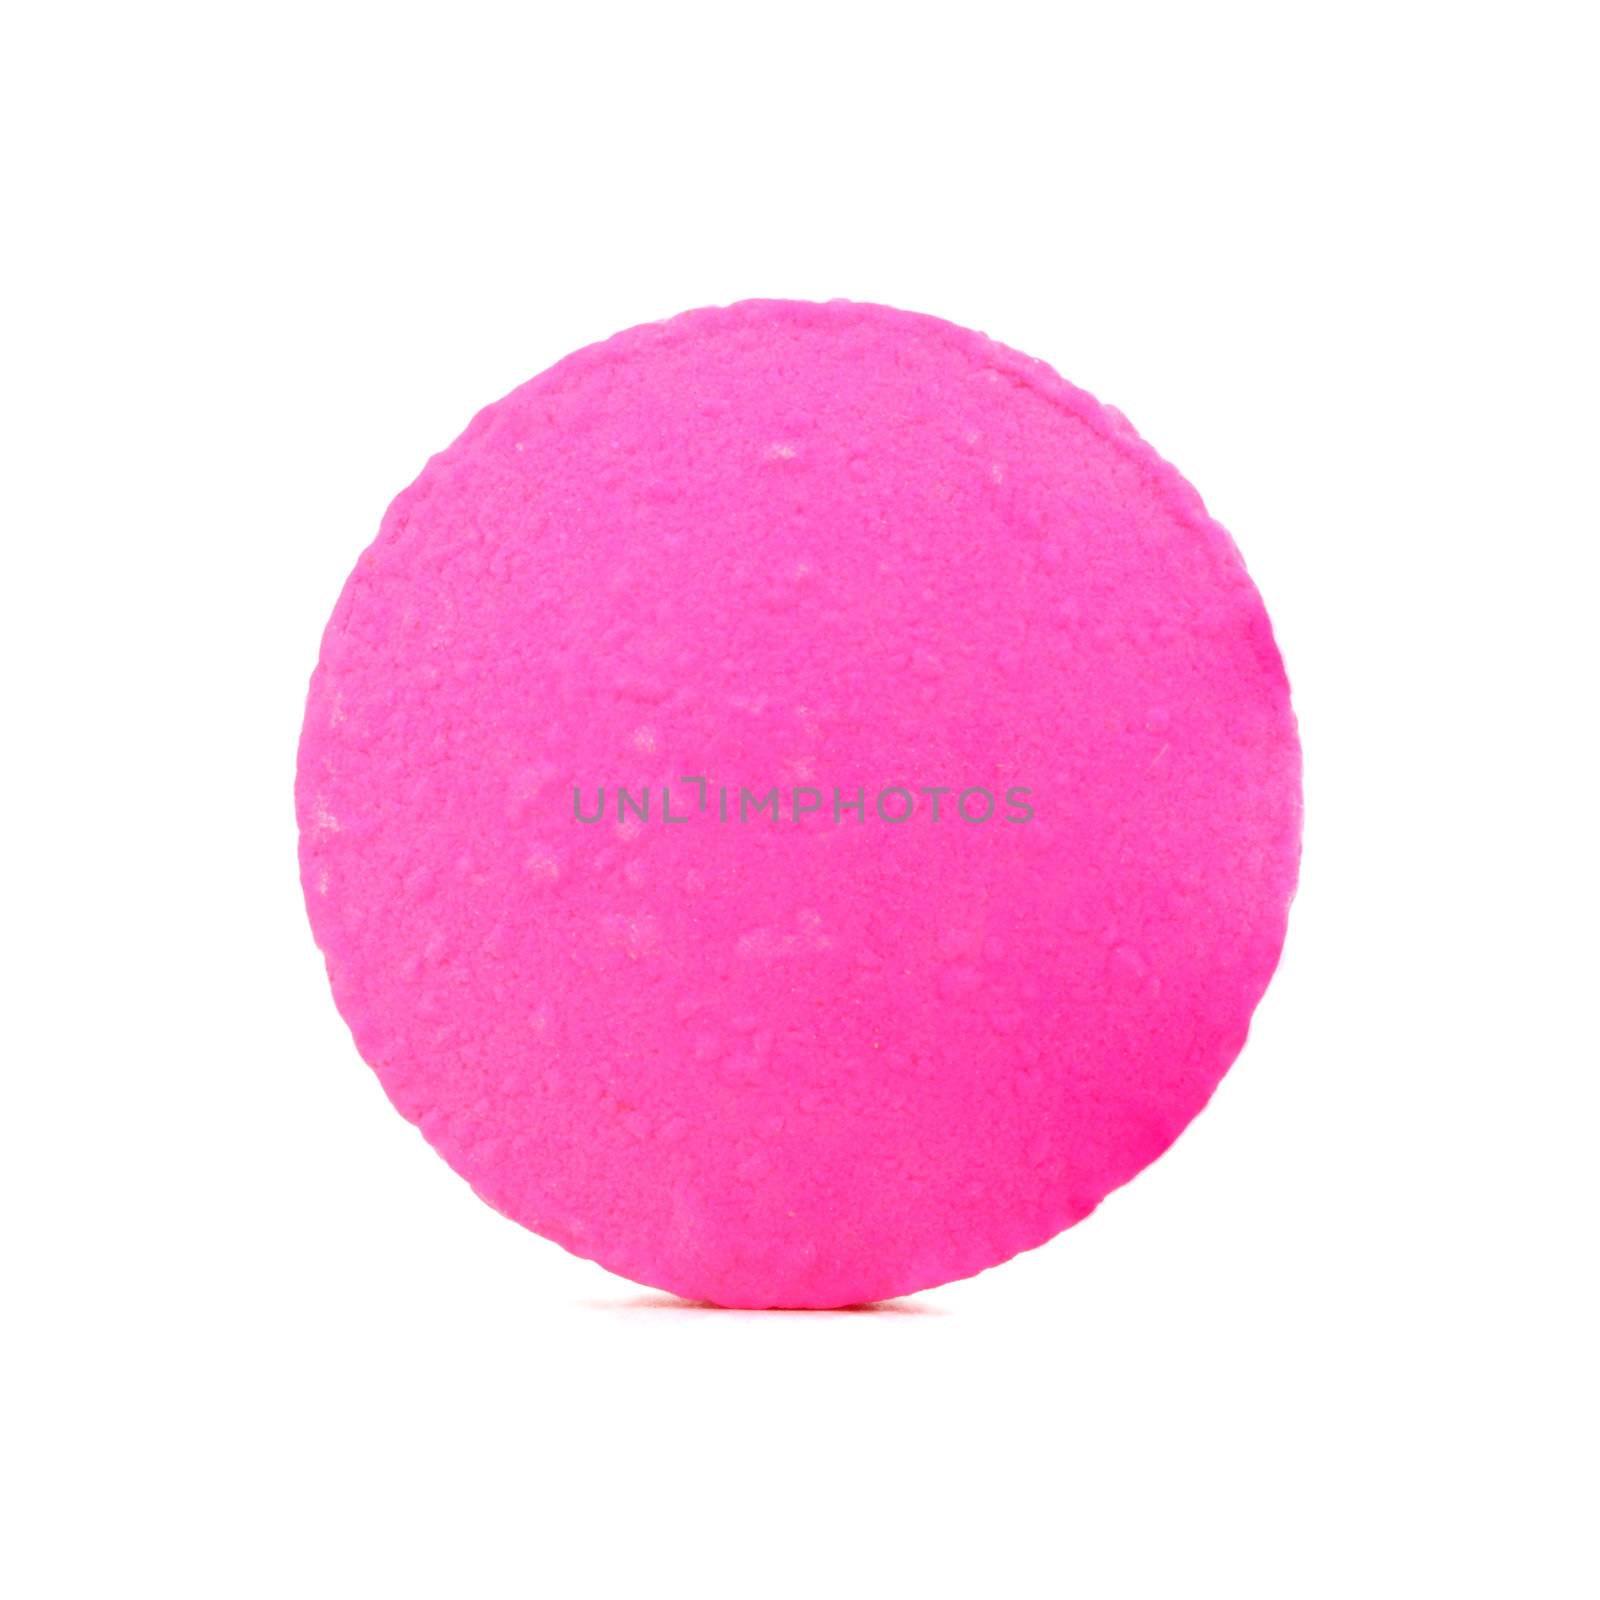 single pink pill on white background